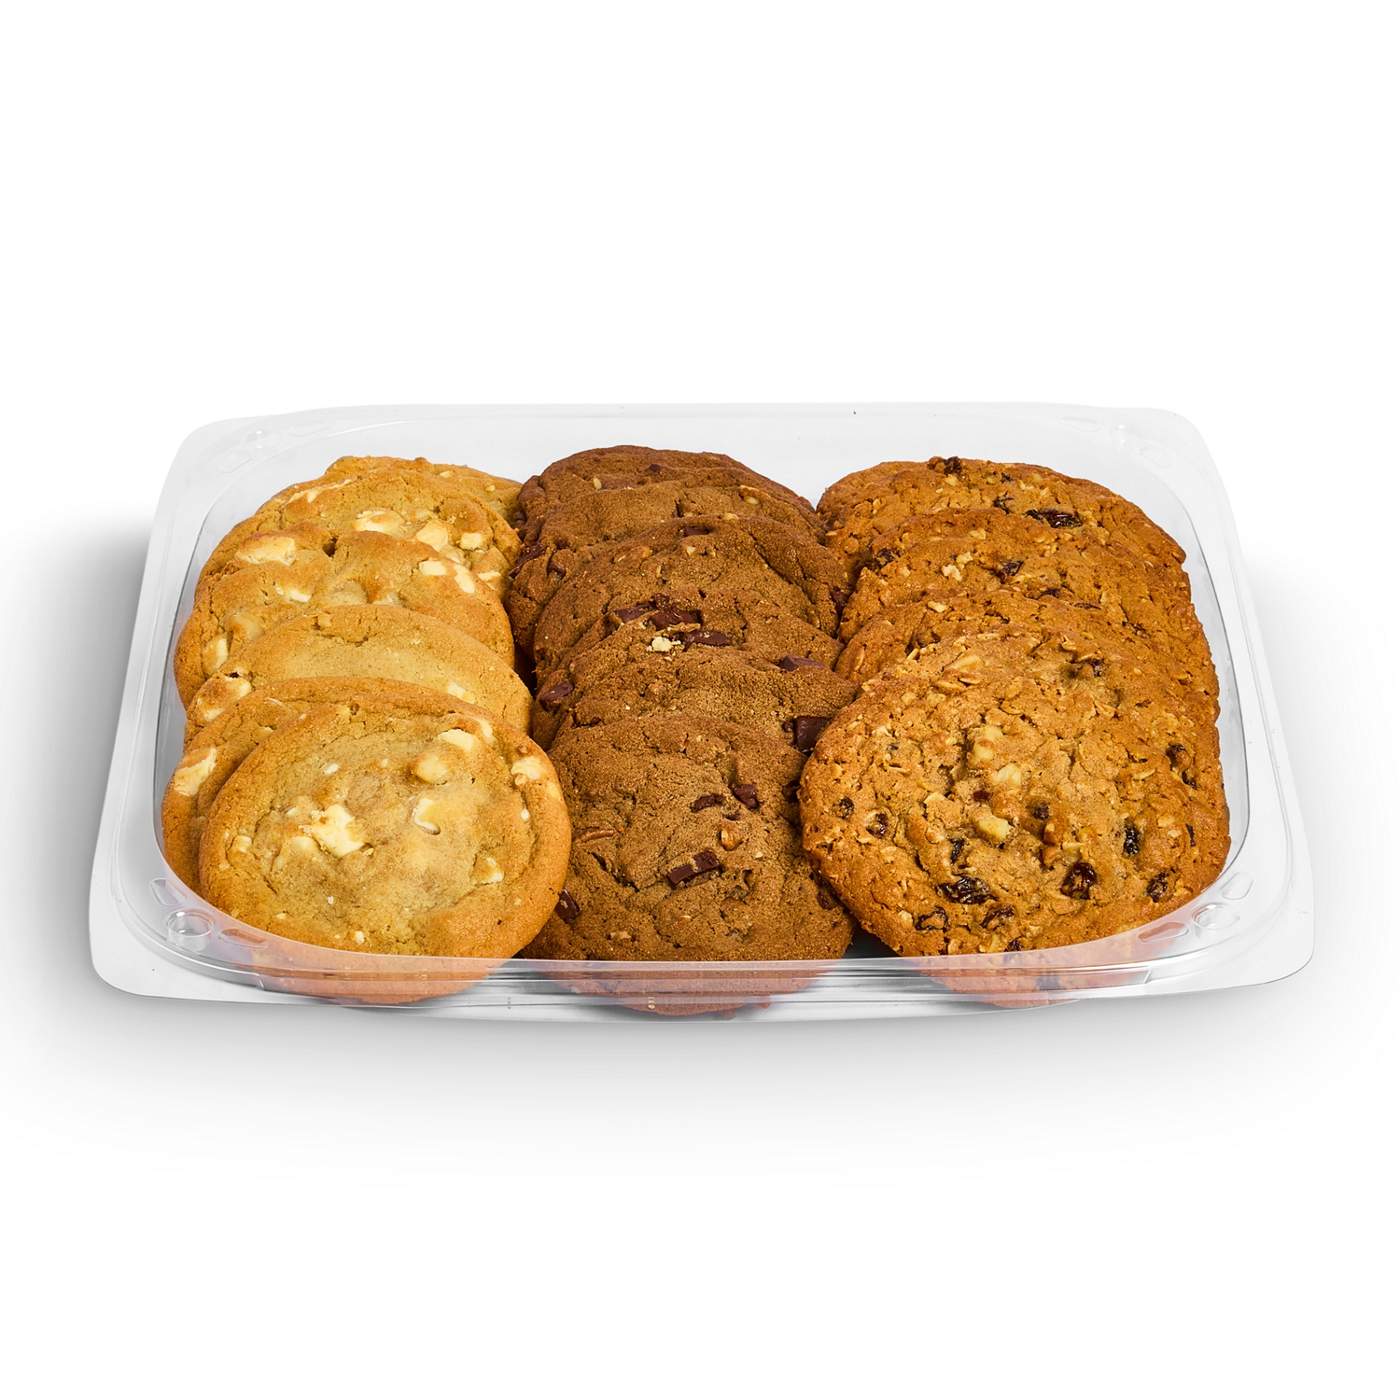 H-E-B Bakery Party Tray - Assorted Gourmet Cookies; image 1 of 3